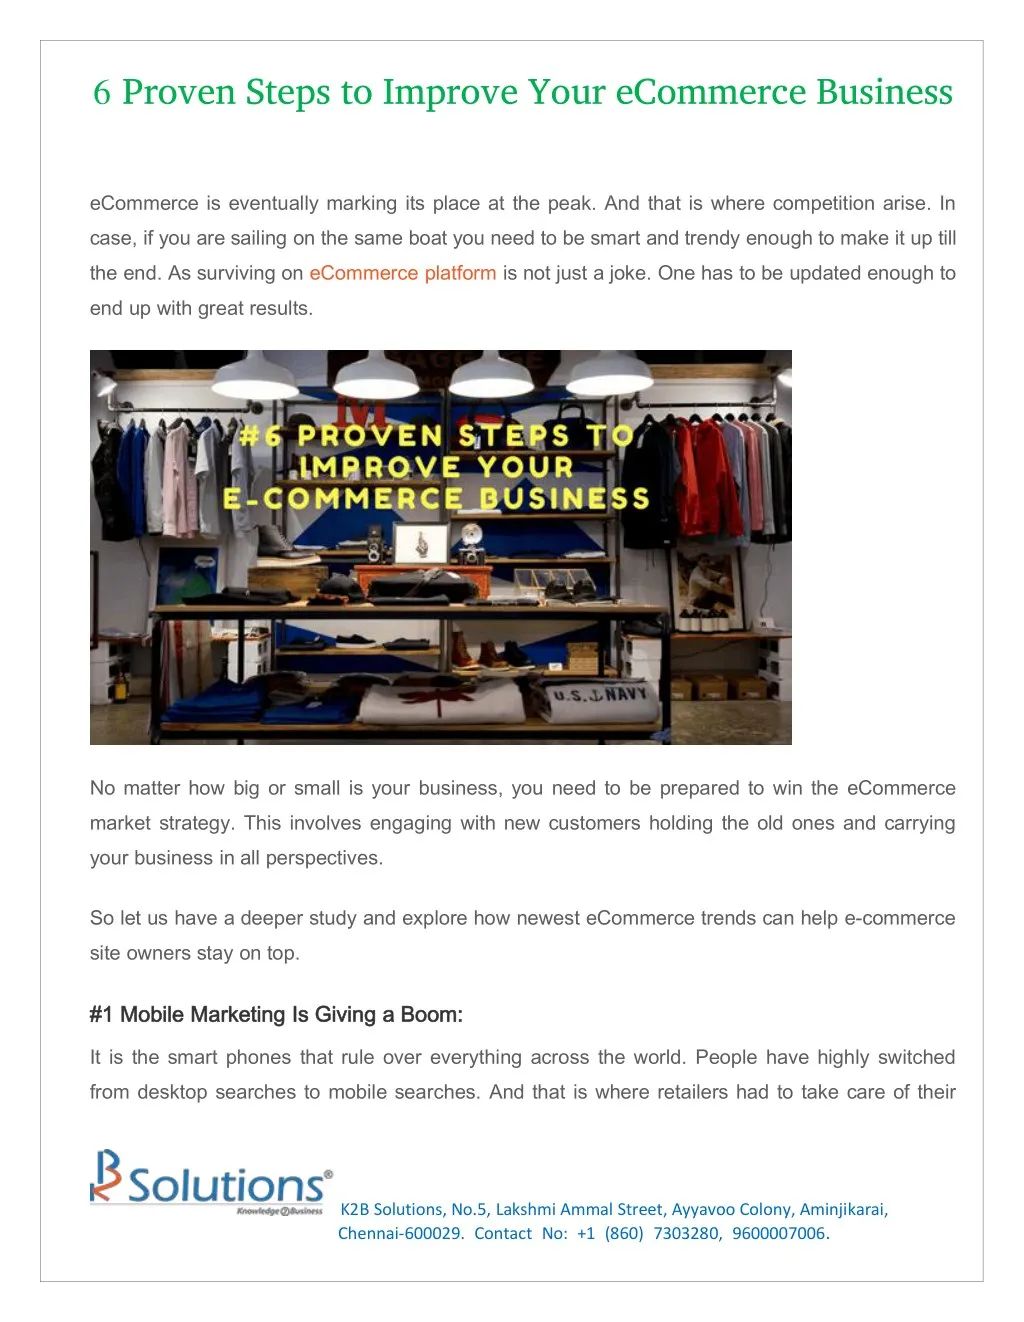 6 proven steps to improve your ecommerce business